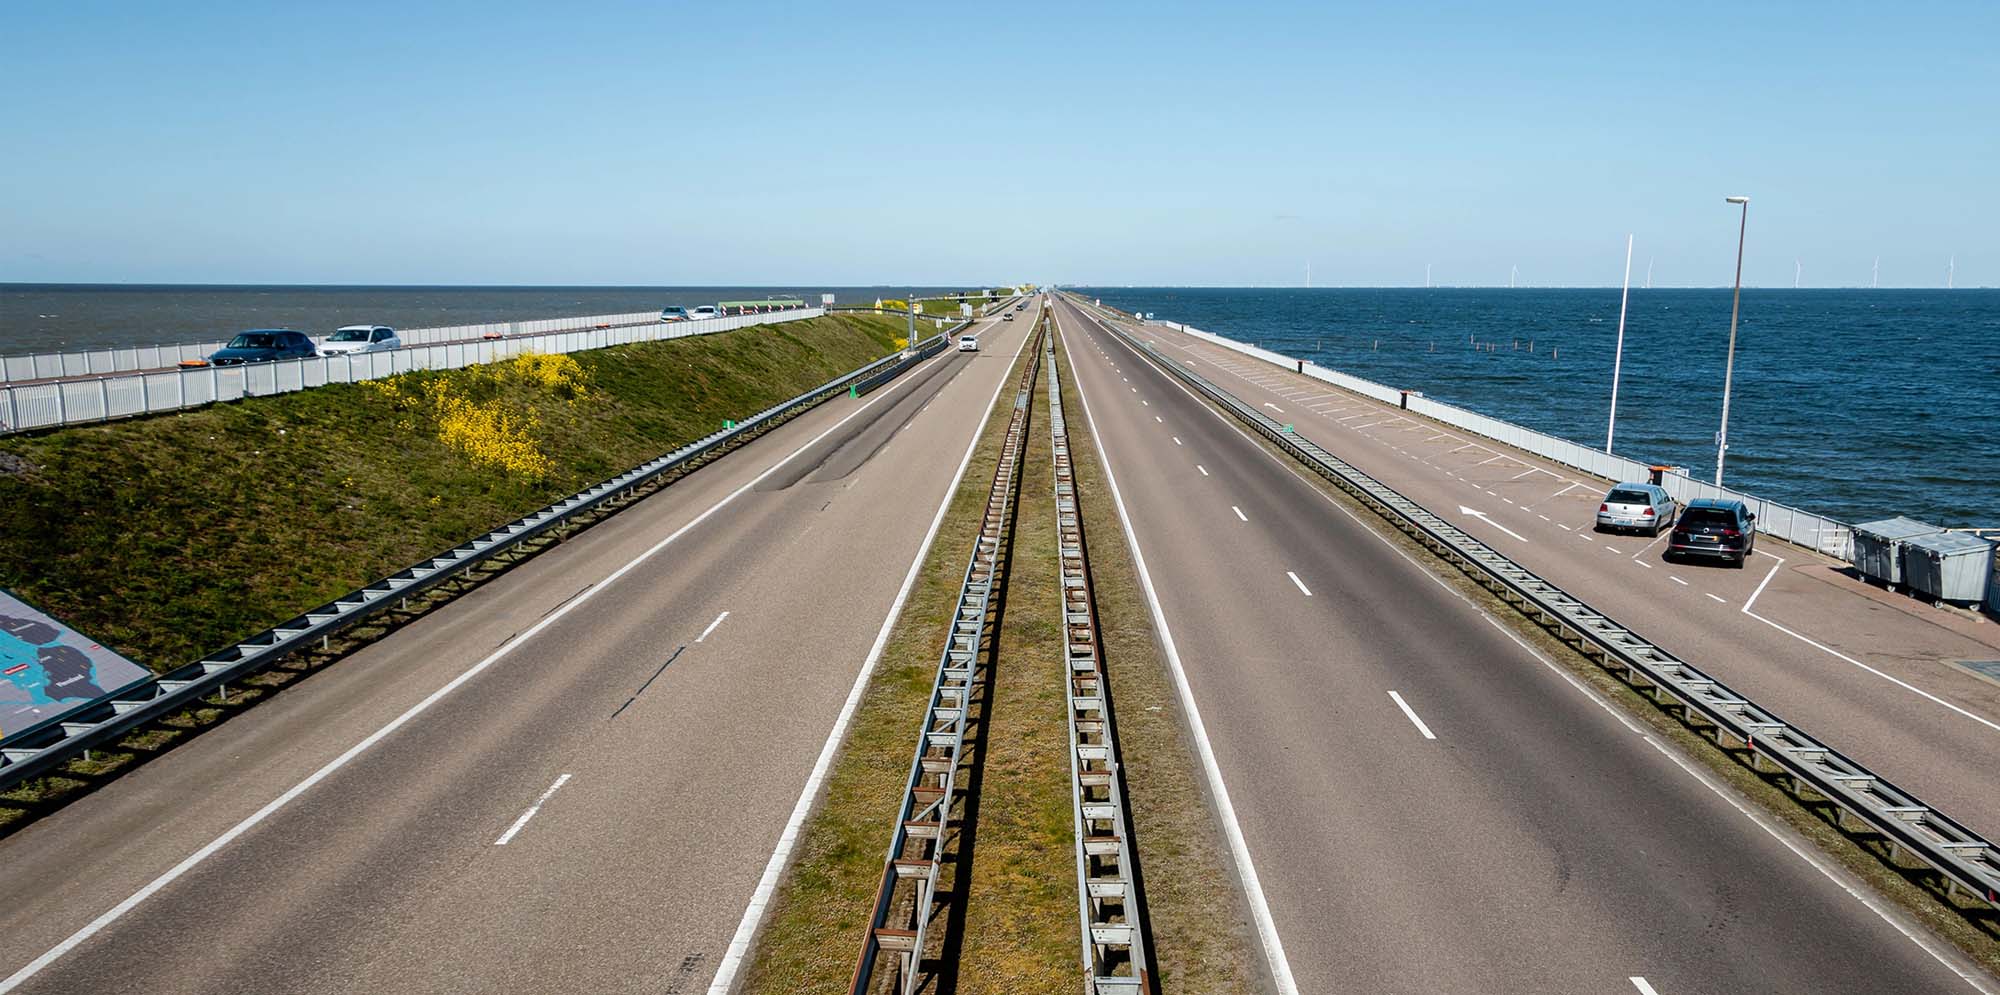 Arcadis, Berenschot and PosadMaxwan win 5 framework contracts from the Dutch Ministry of Infrastructure and Water Management